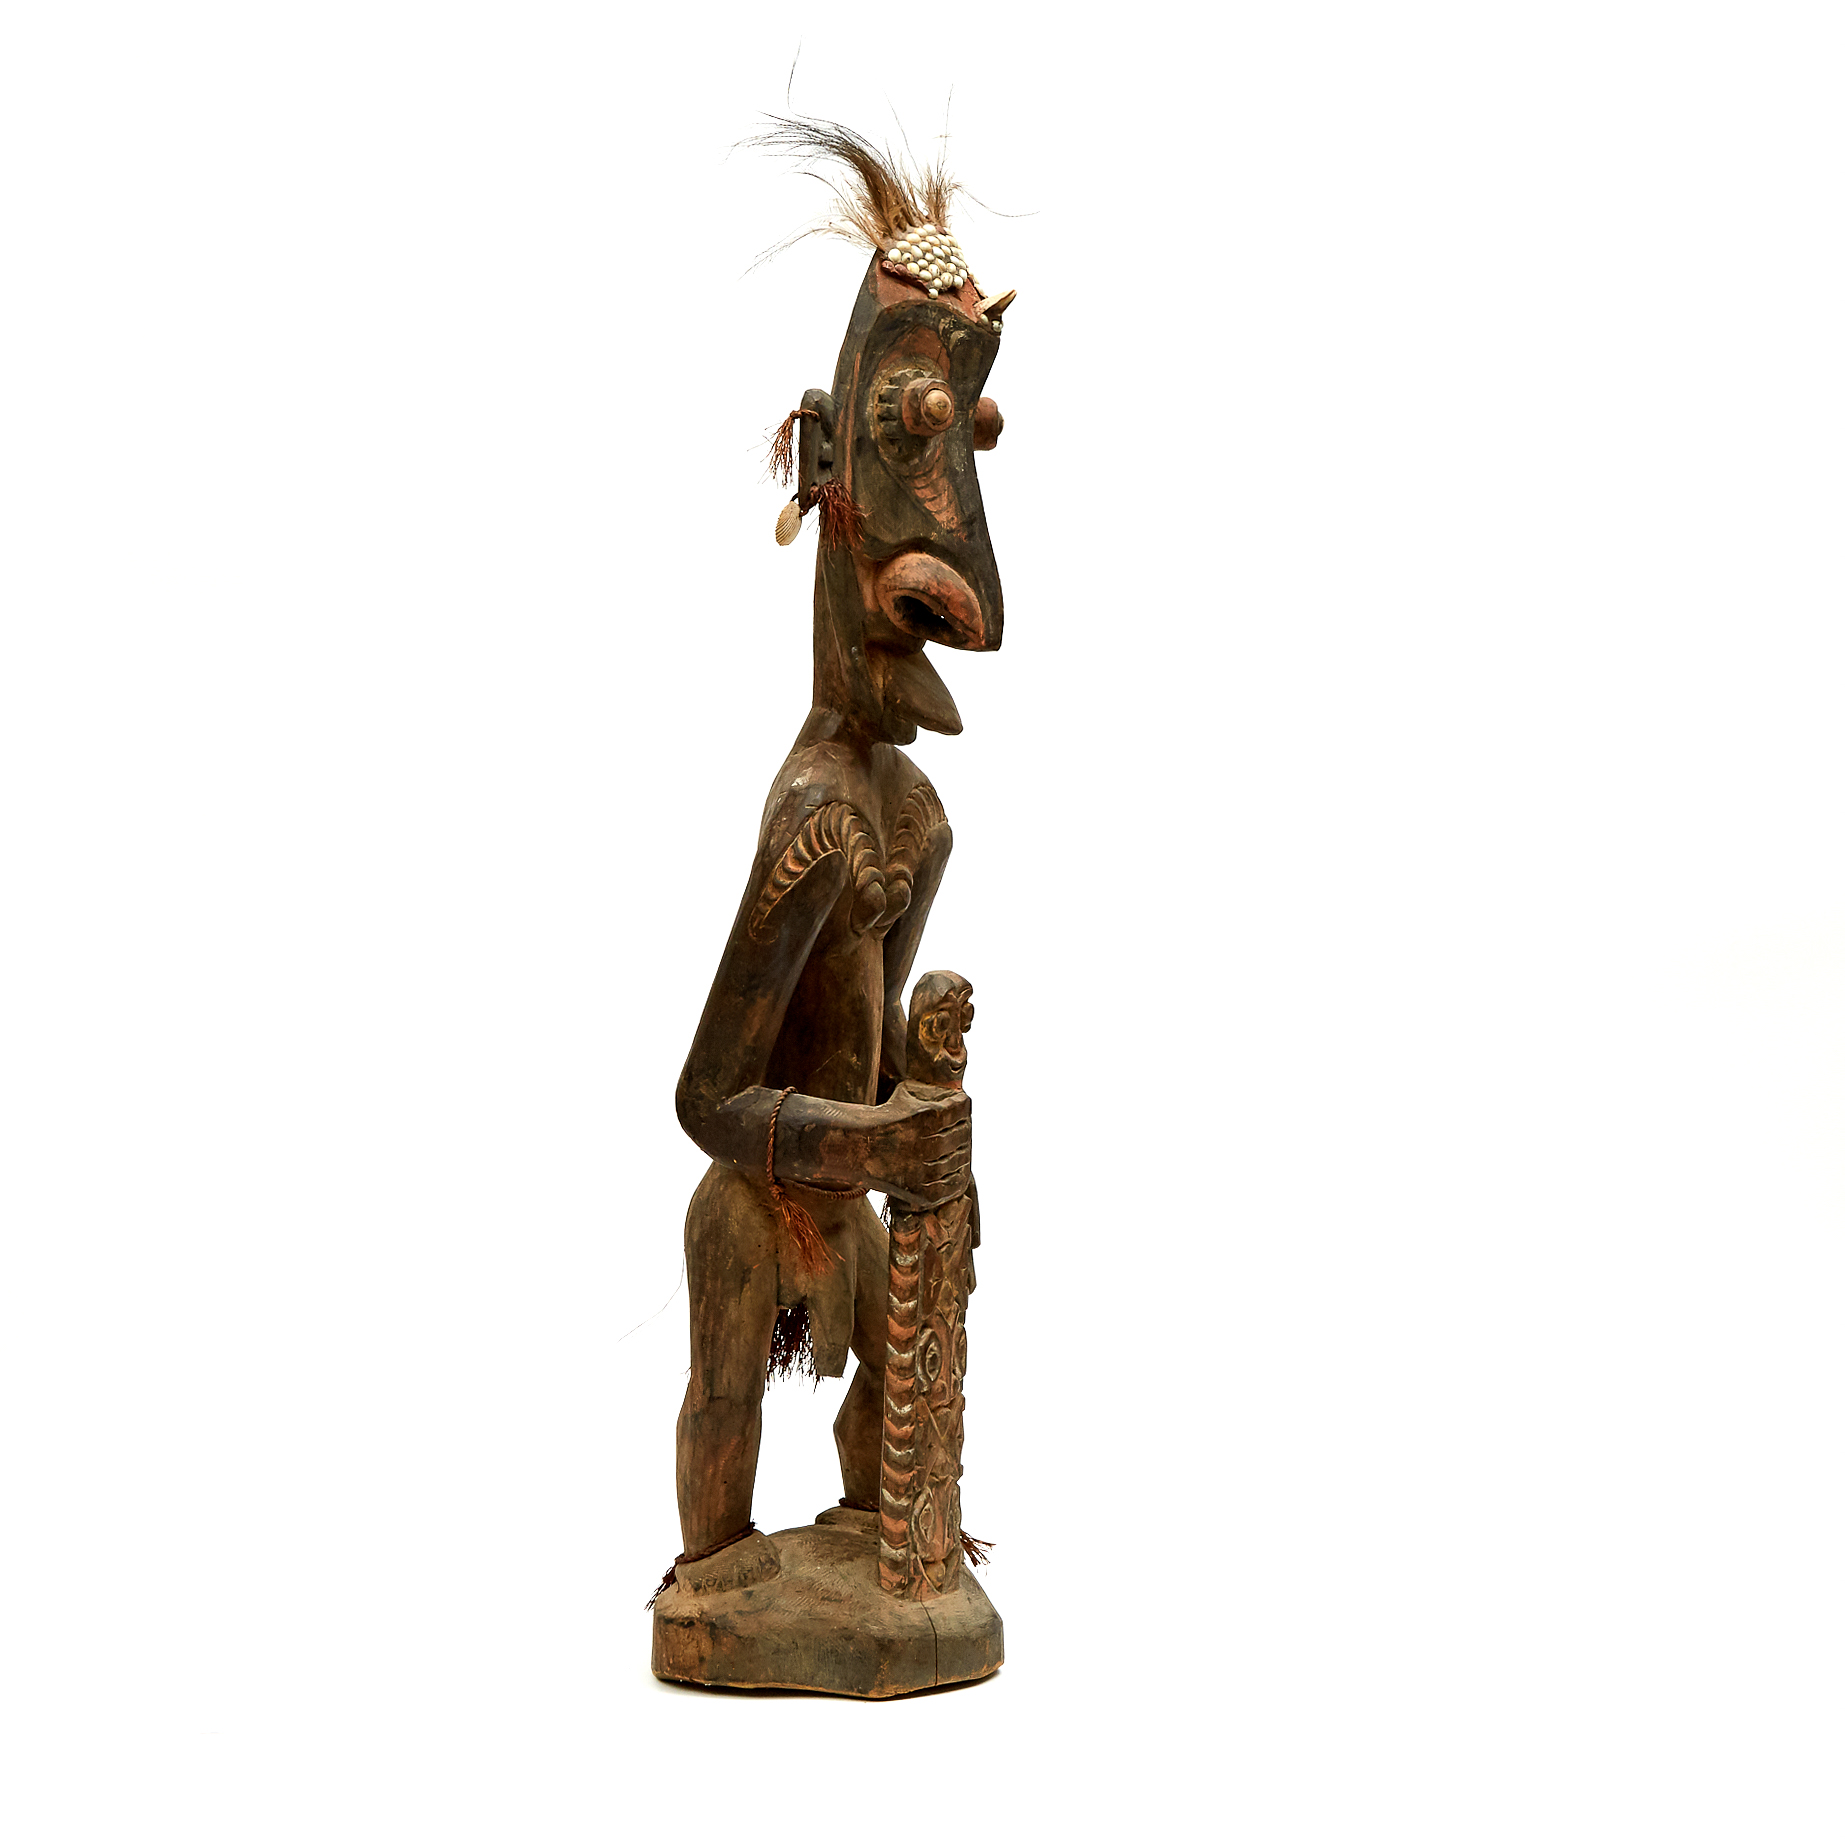 Papua New Guinea Male Ancestral Figure, mid to late 20th century